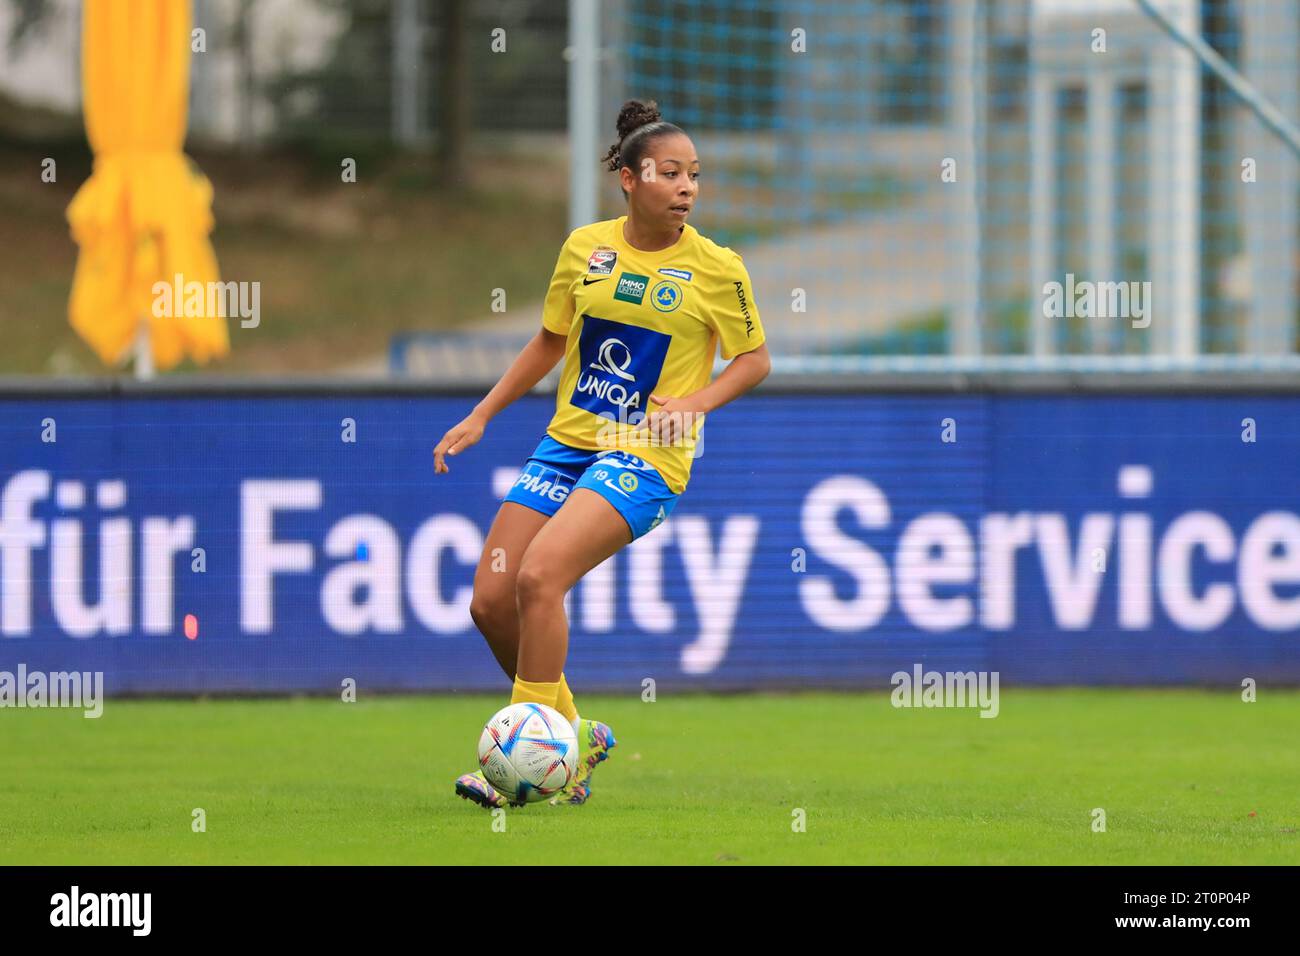 Nicole Ojukwu (19 First Vienna FC) in action during the Admiral Frauen Bundesliga match First Vienna FC vs SCR Altach at Hohe Warte  (Tom Seiss/ SPP) Stock Photo